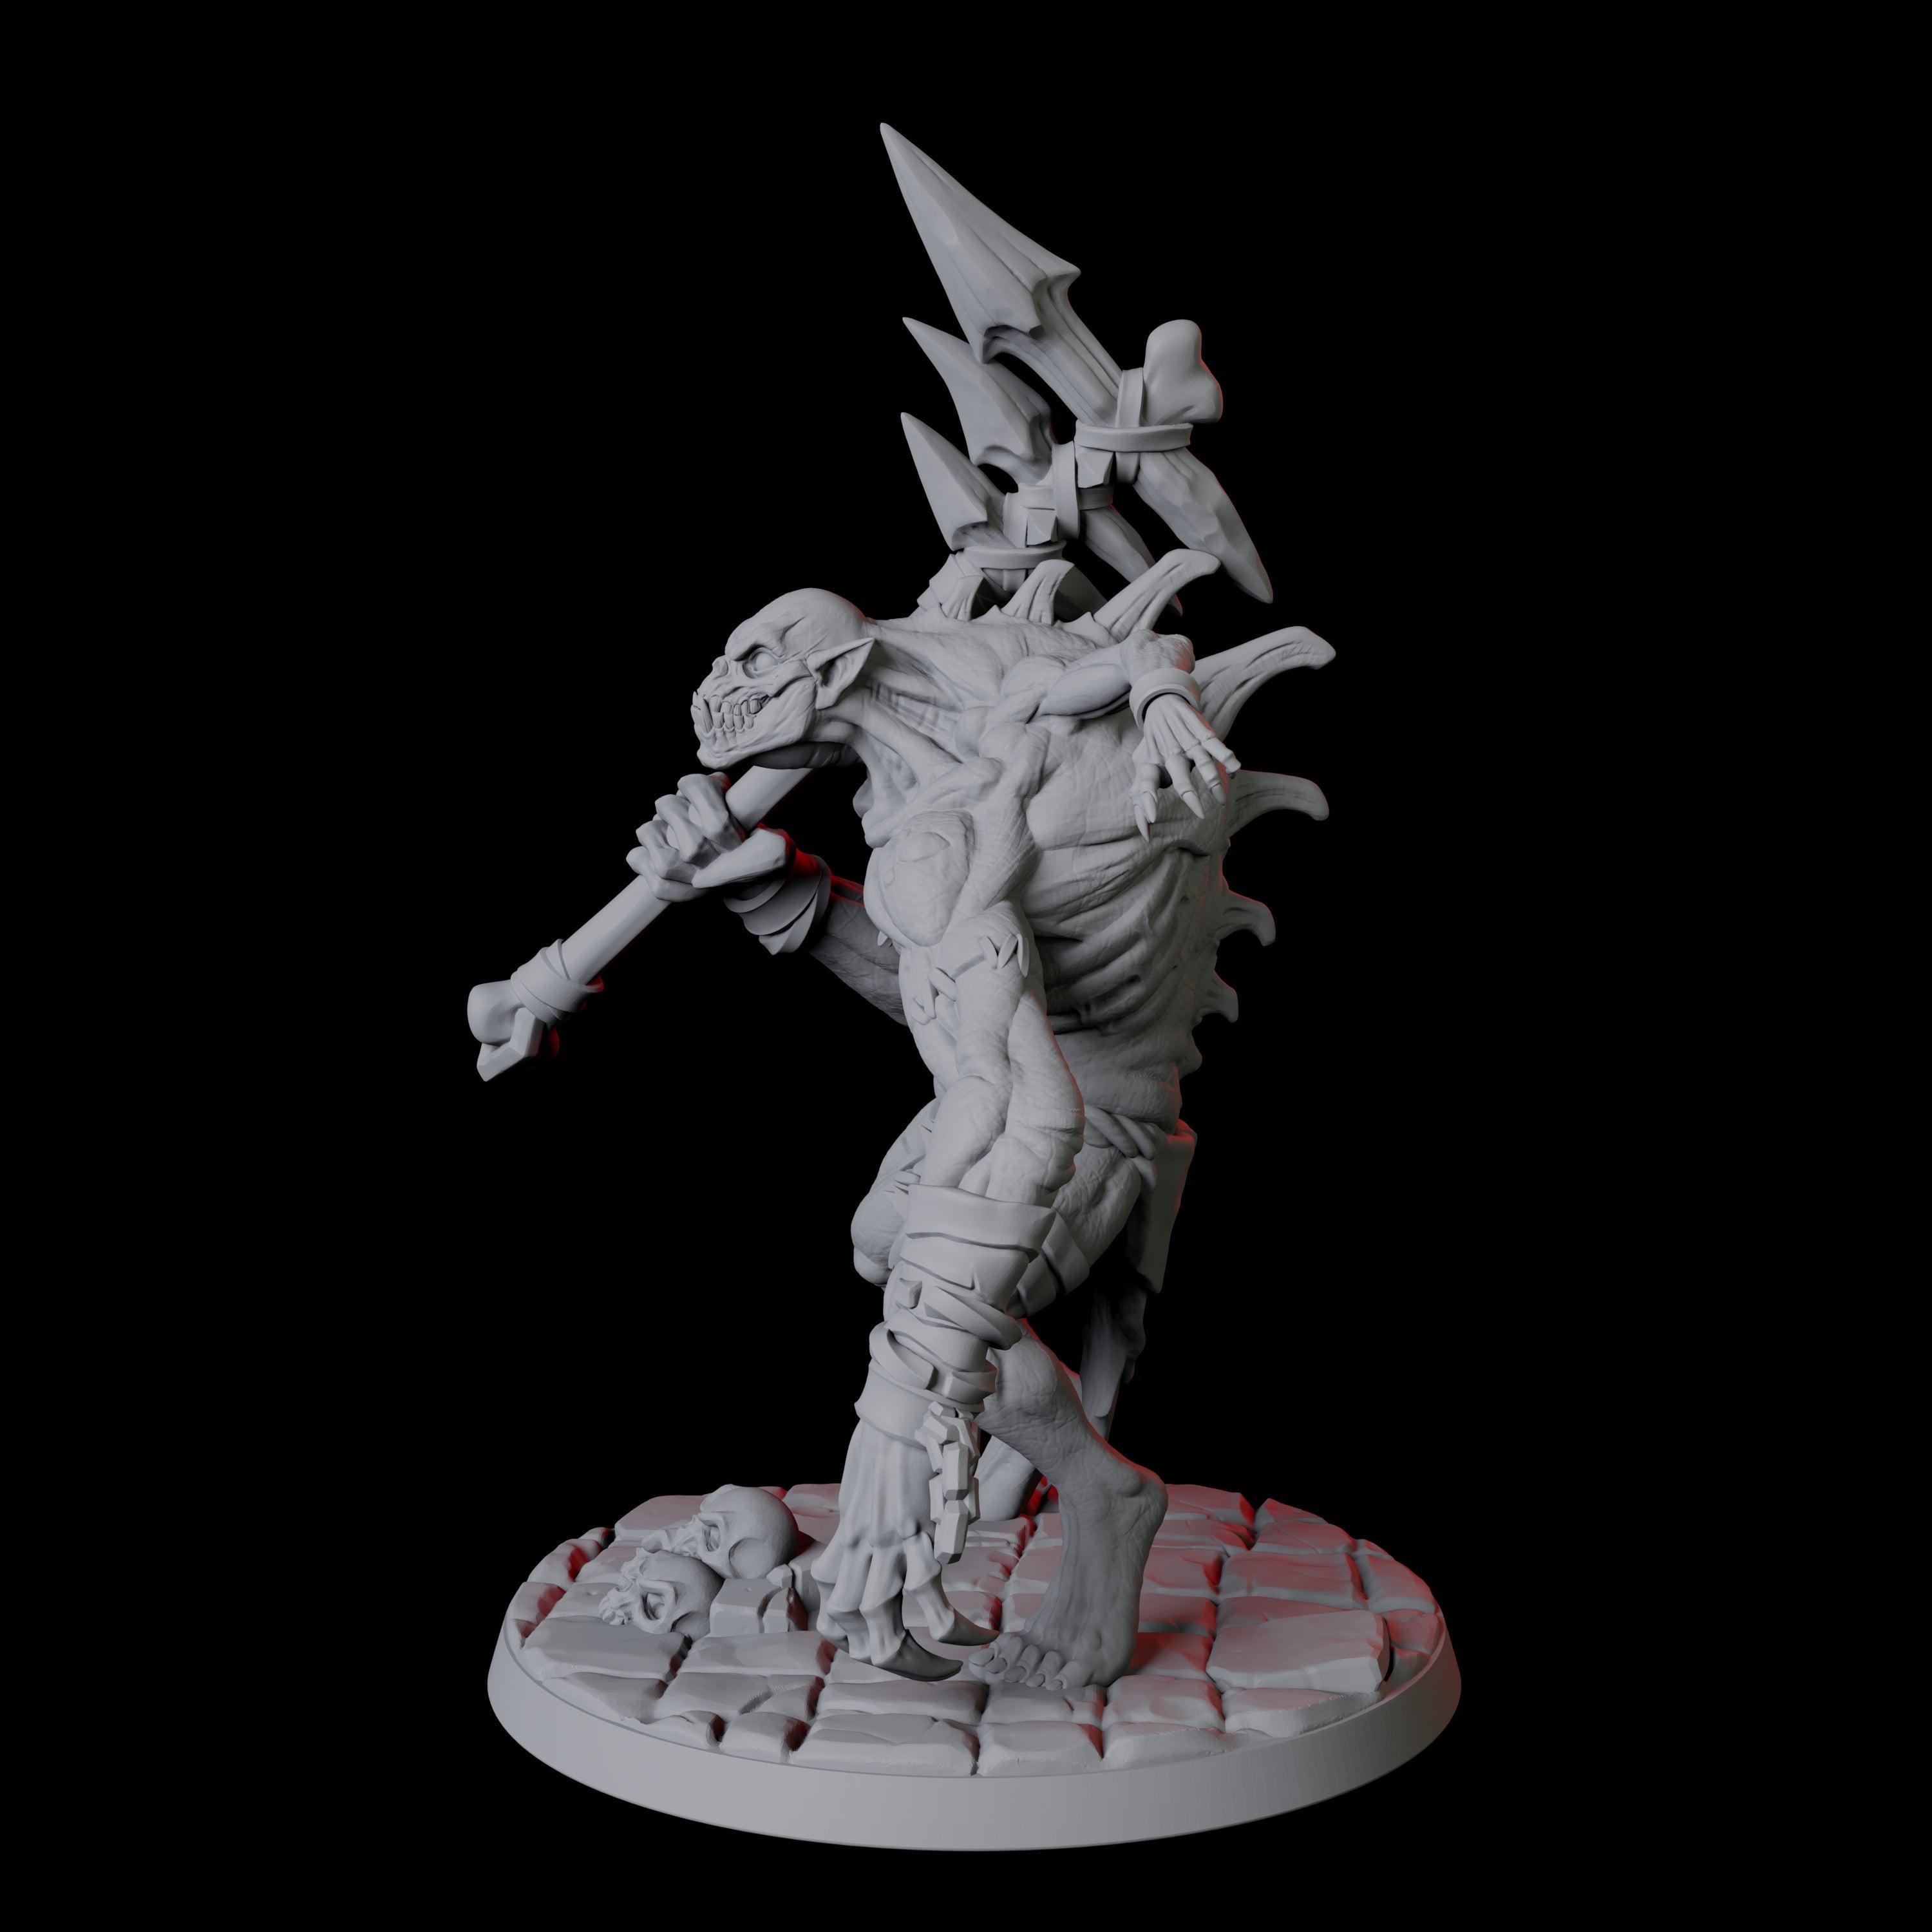 Roaming Ghast B Miniature for Dungeons and Dragons, Pathfinder or other TTRPGs